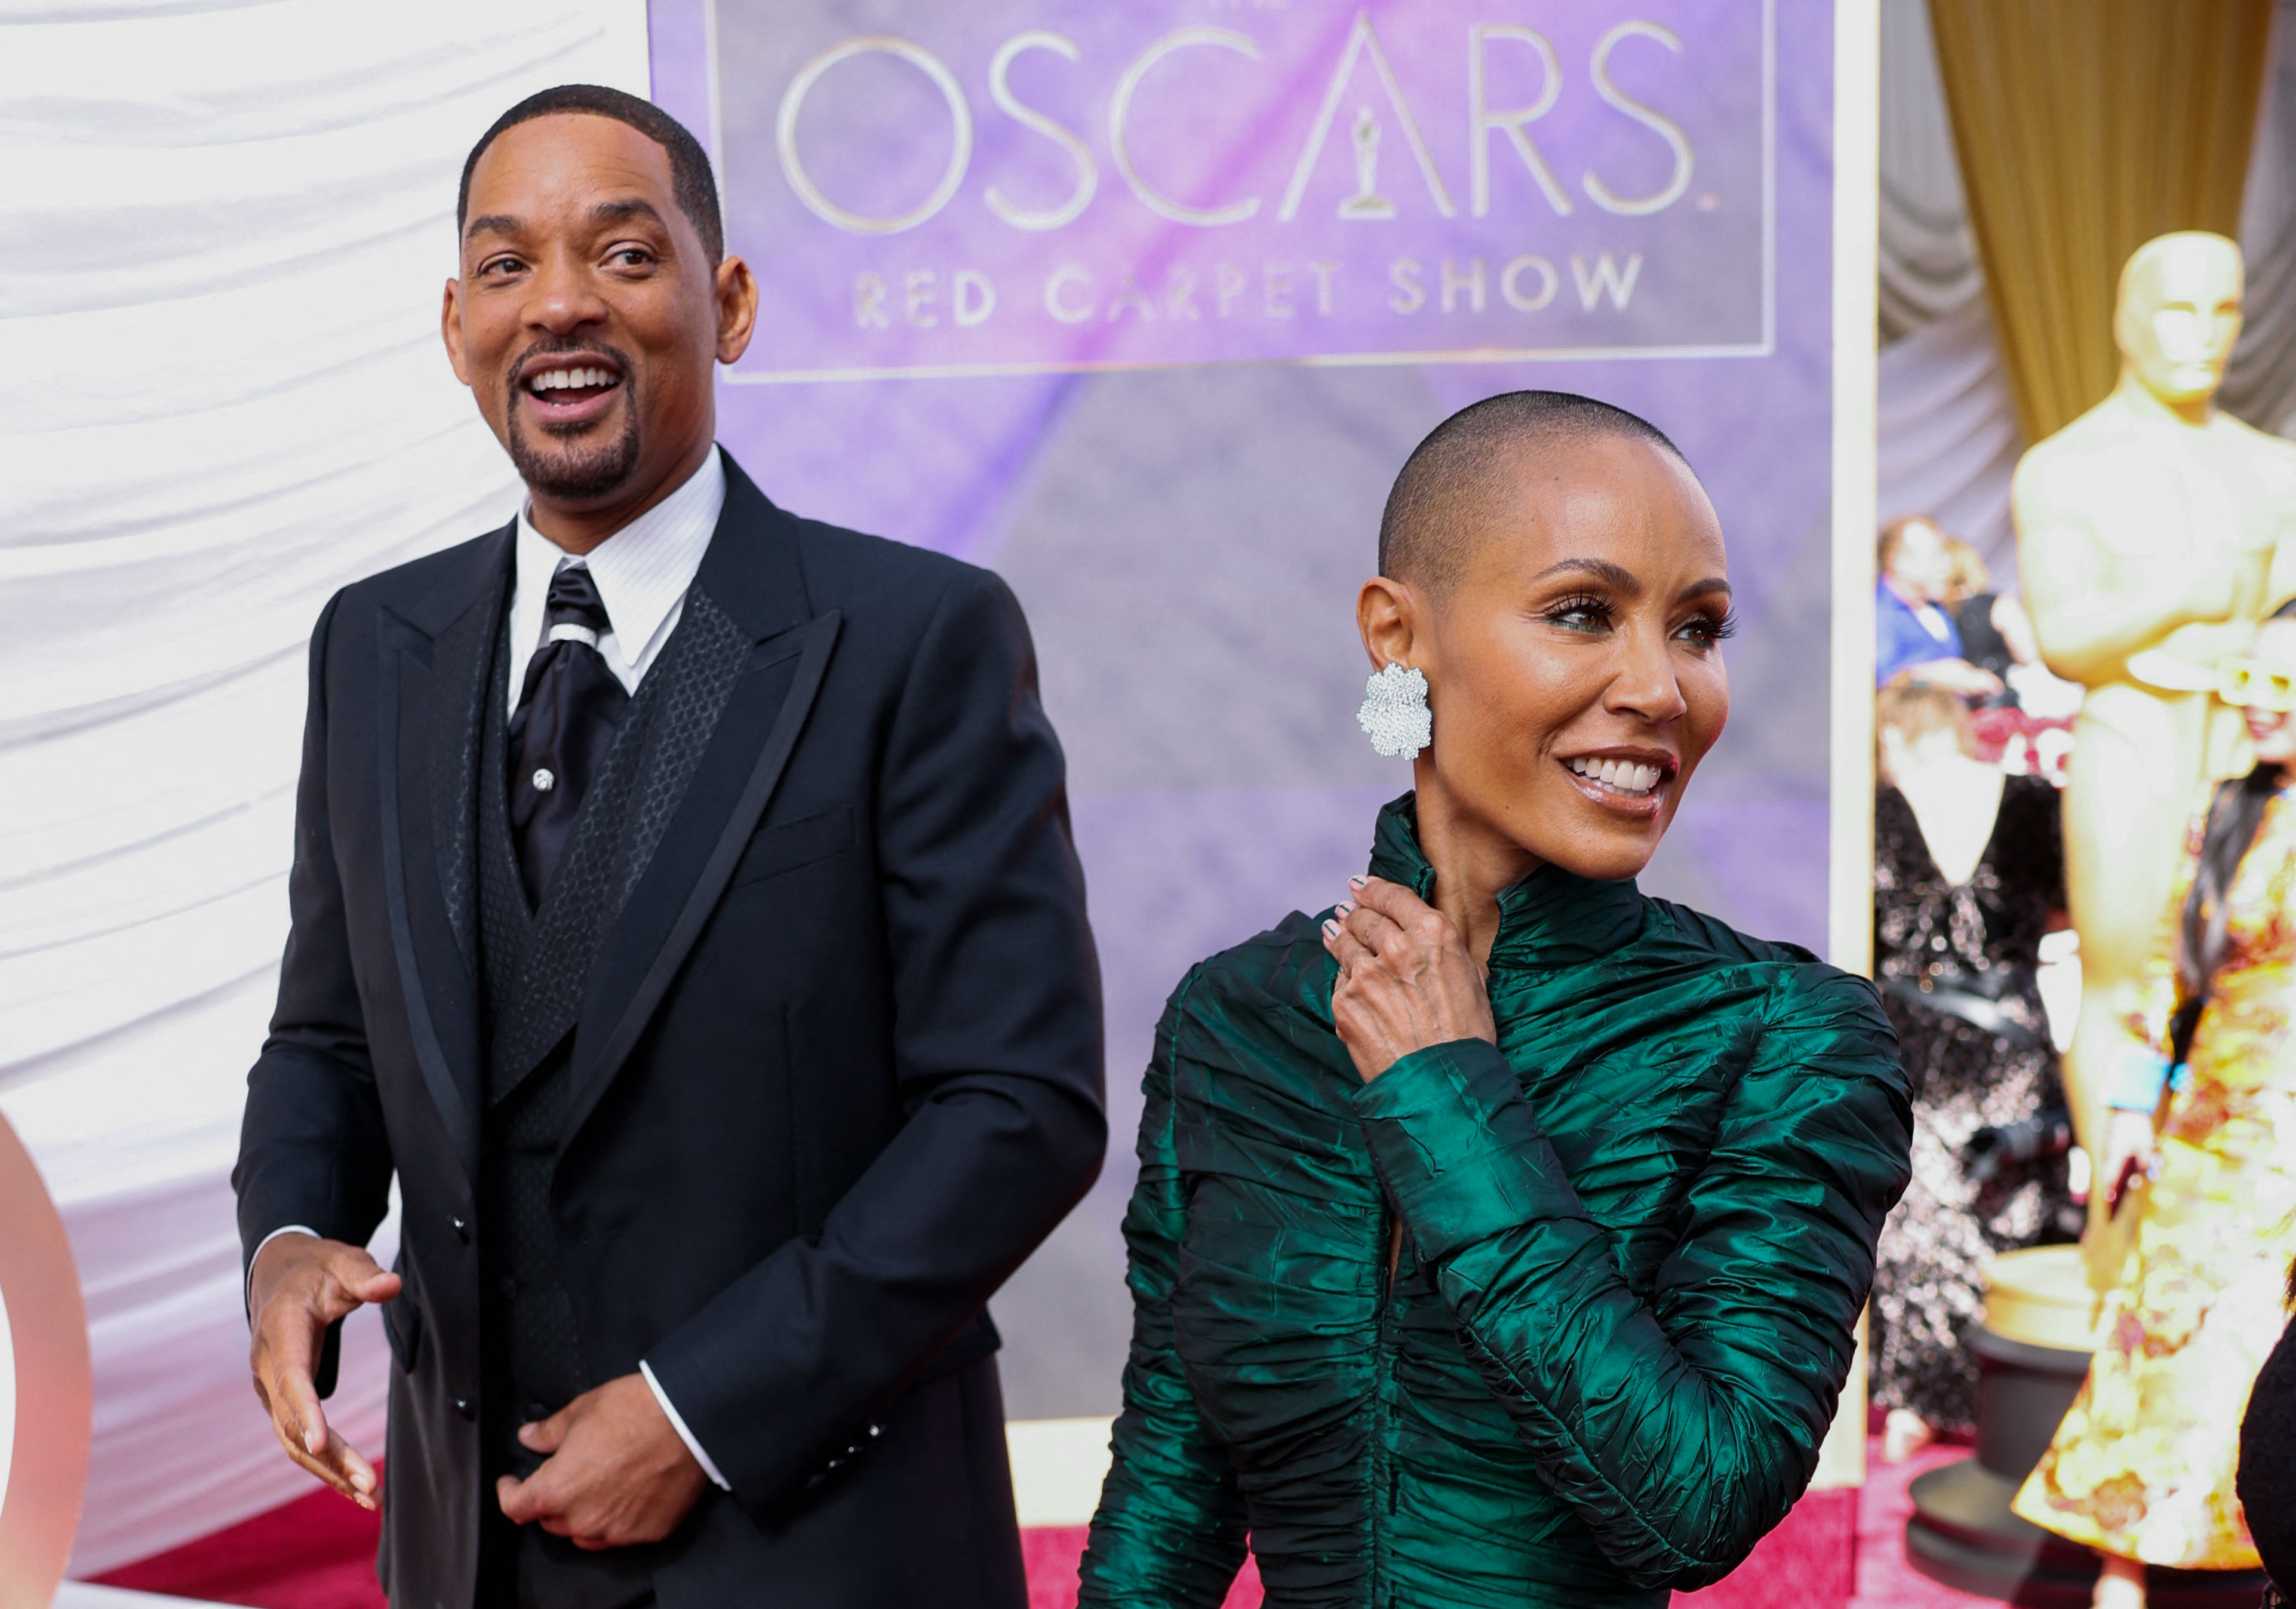 Will Smith and Jada Pinkett Smith pose on the red carpet during the Oscars arrivals at the 94th Academy Awards in Hollywood, Los Angeles, California, US, March 27, 2022. REUTERS/Mike Blake